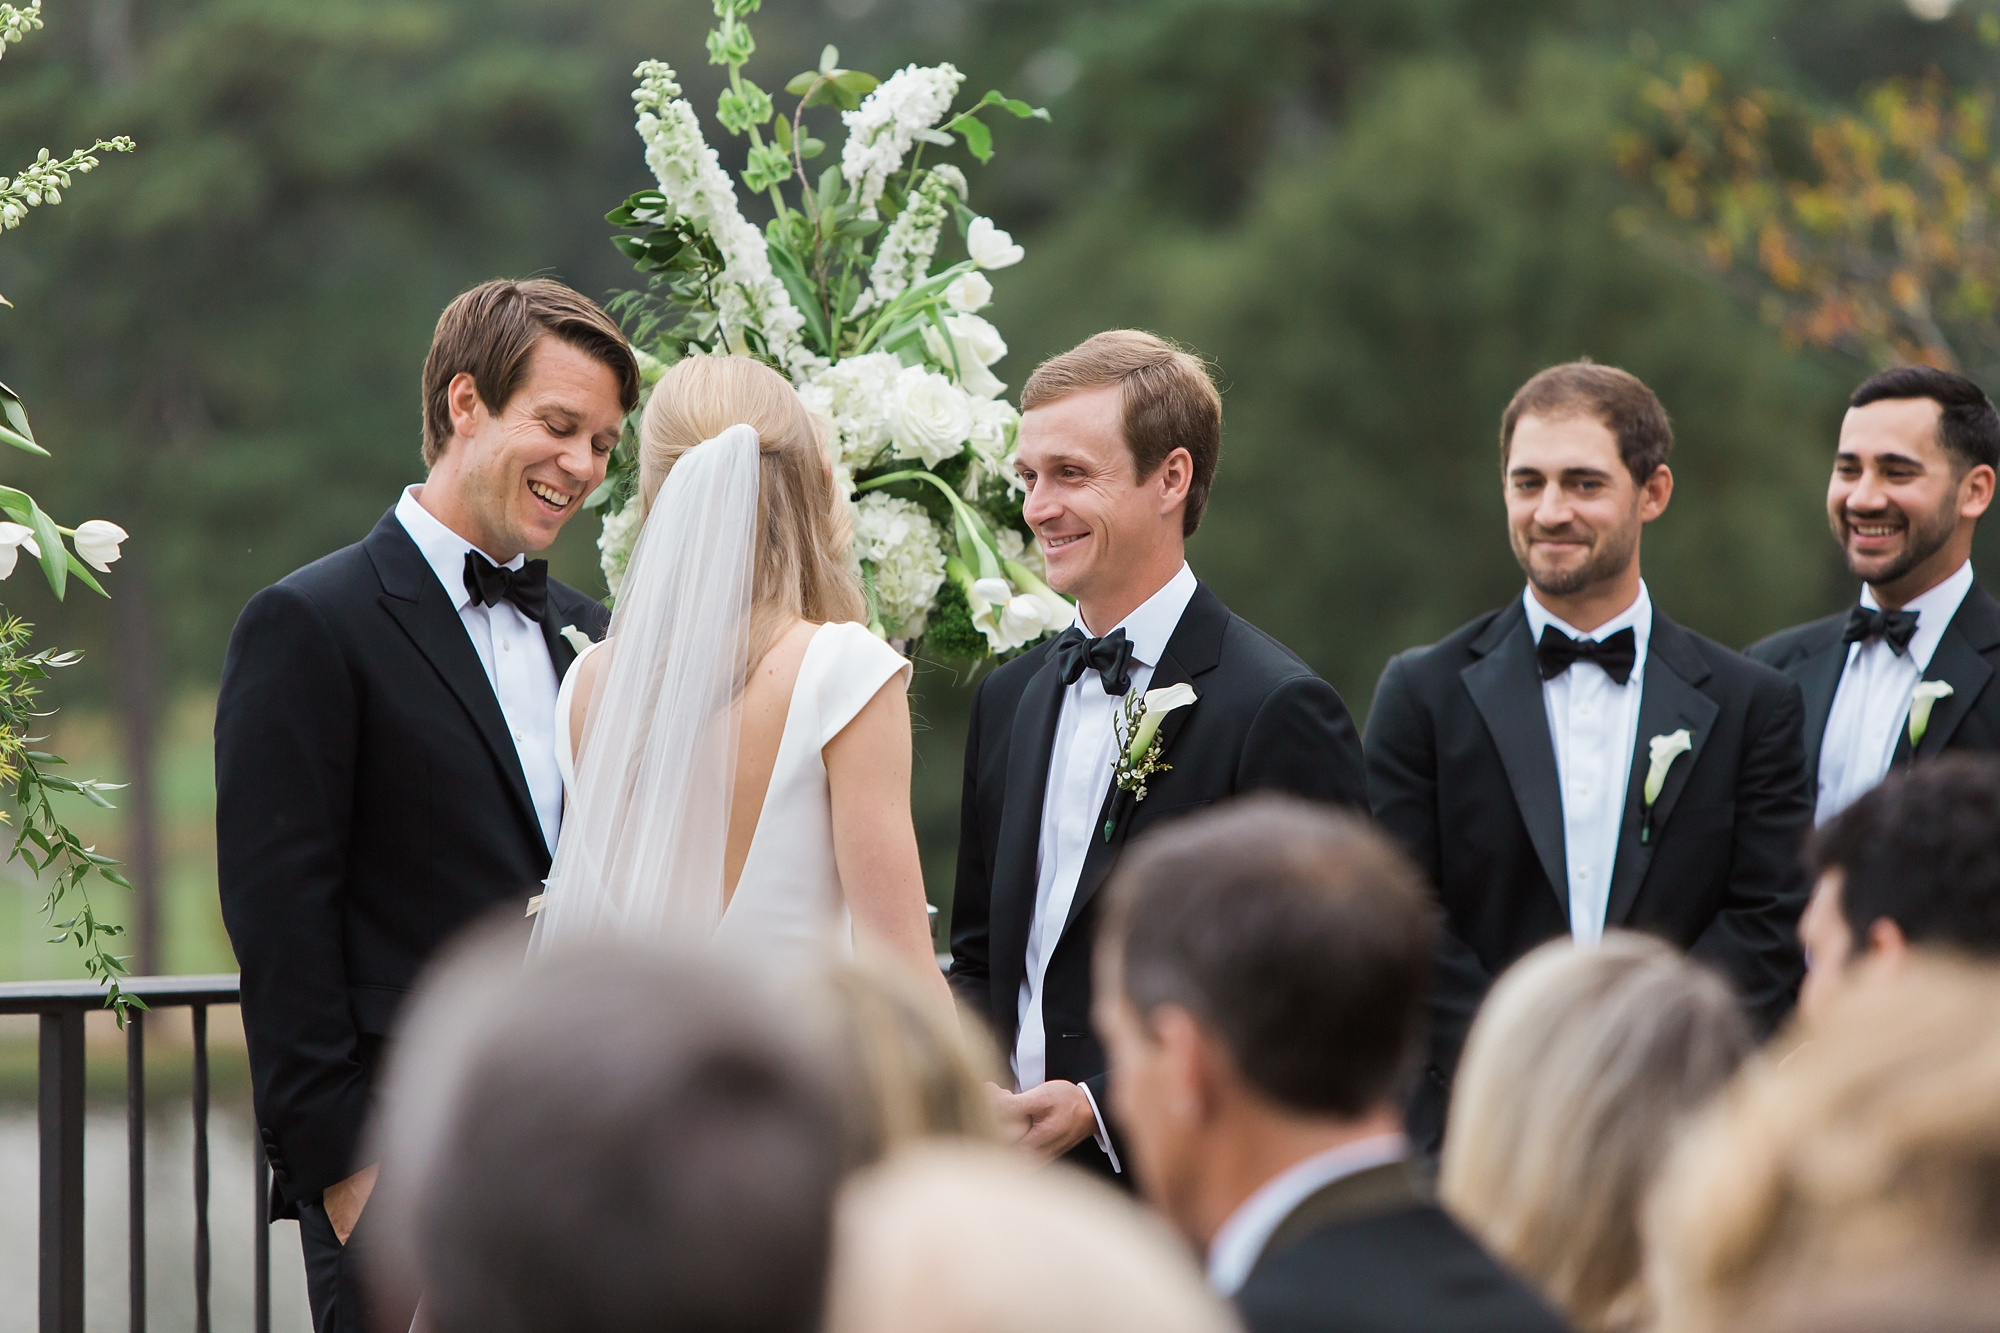 Black tie wedding ceremony at East Lake Golf Club by Atlanta's top wedding photographers Leigh and Becca